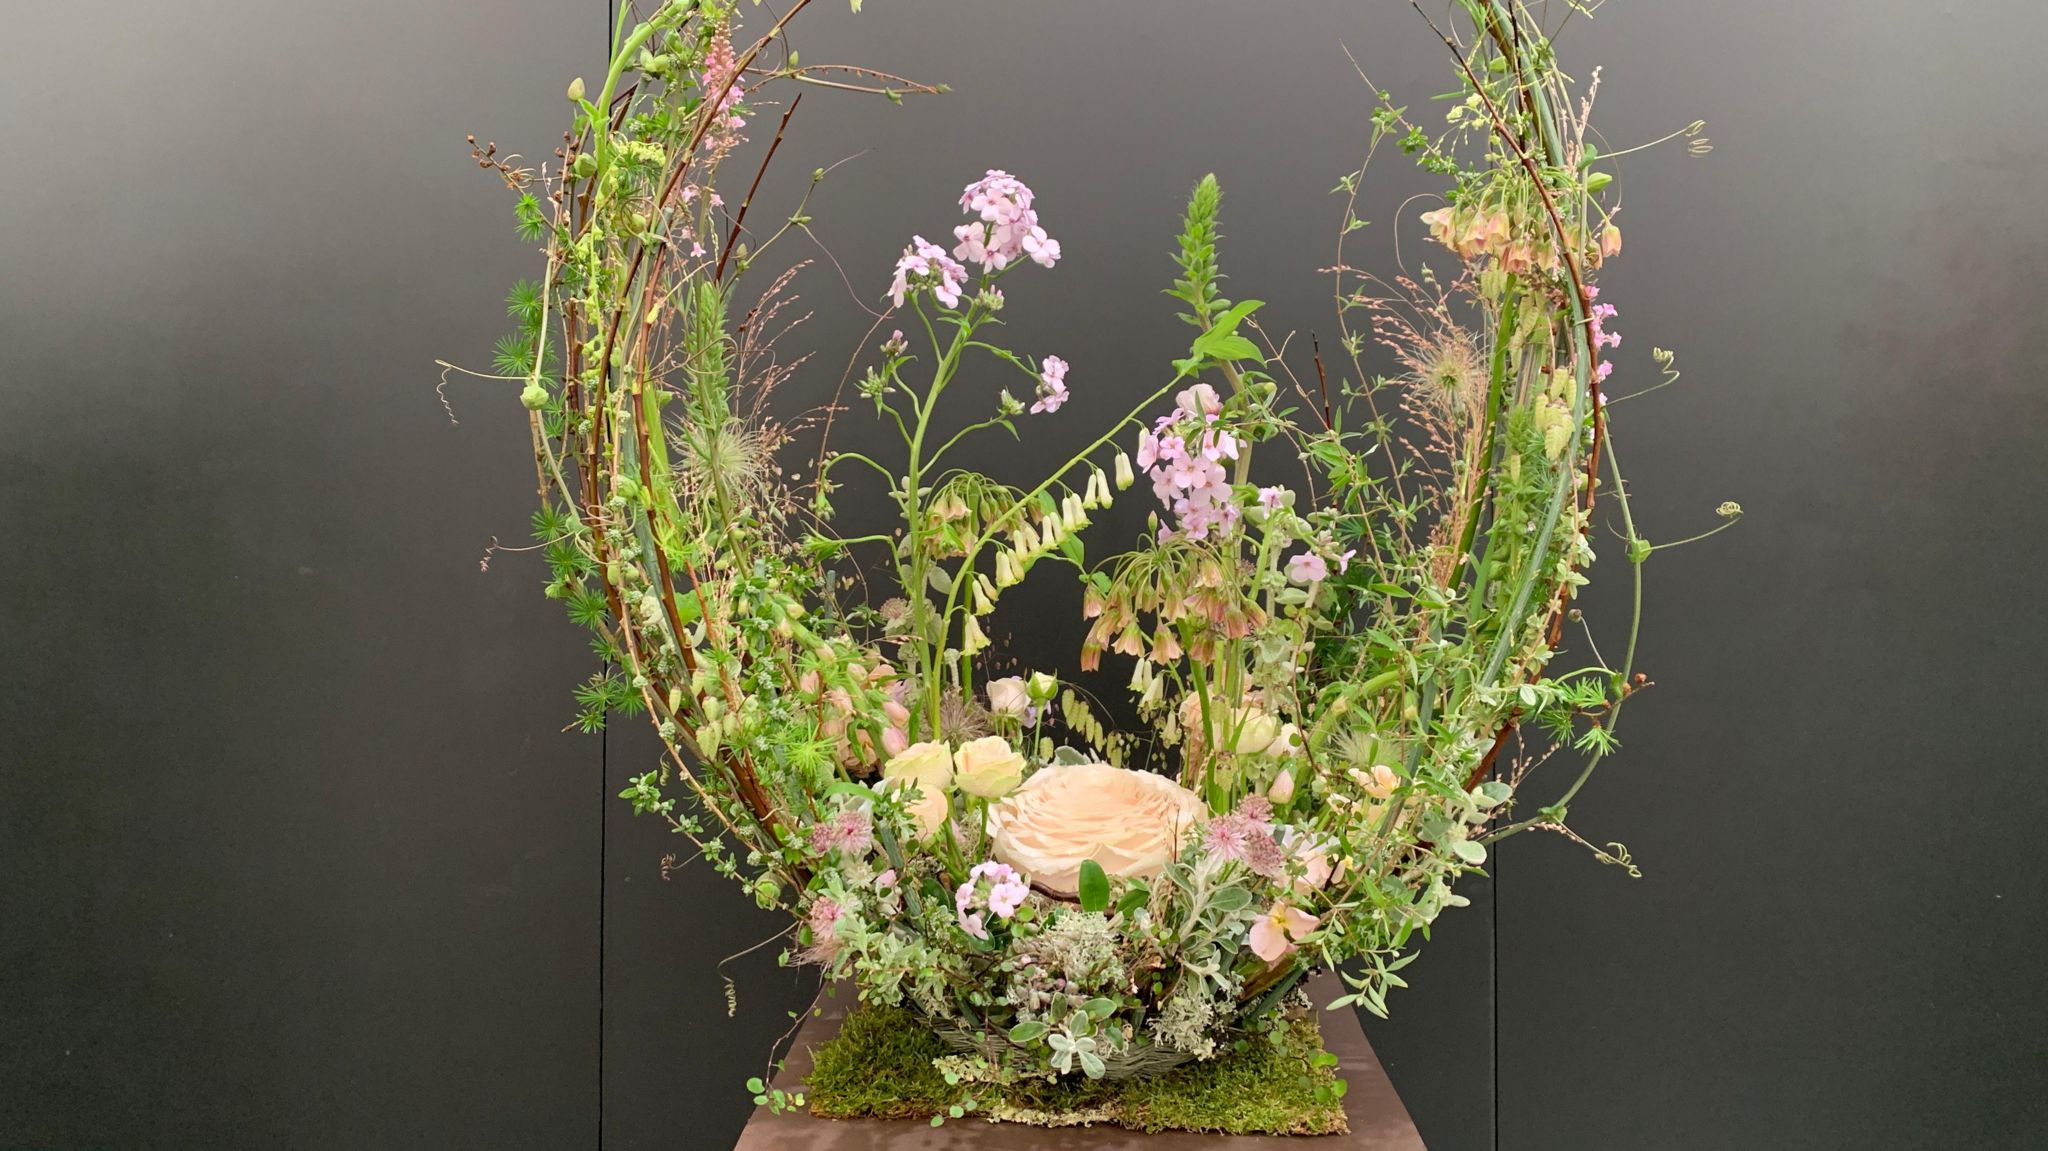 The Chelsea Flower Show exhibit, Inner Peace, which is a cocoon shaped display of grasses and pale pink, peach and lilac flowers, with a handmade rose at its centre